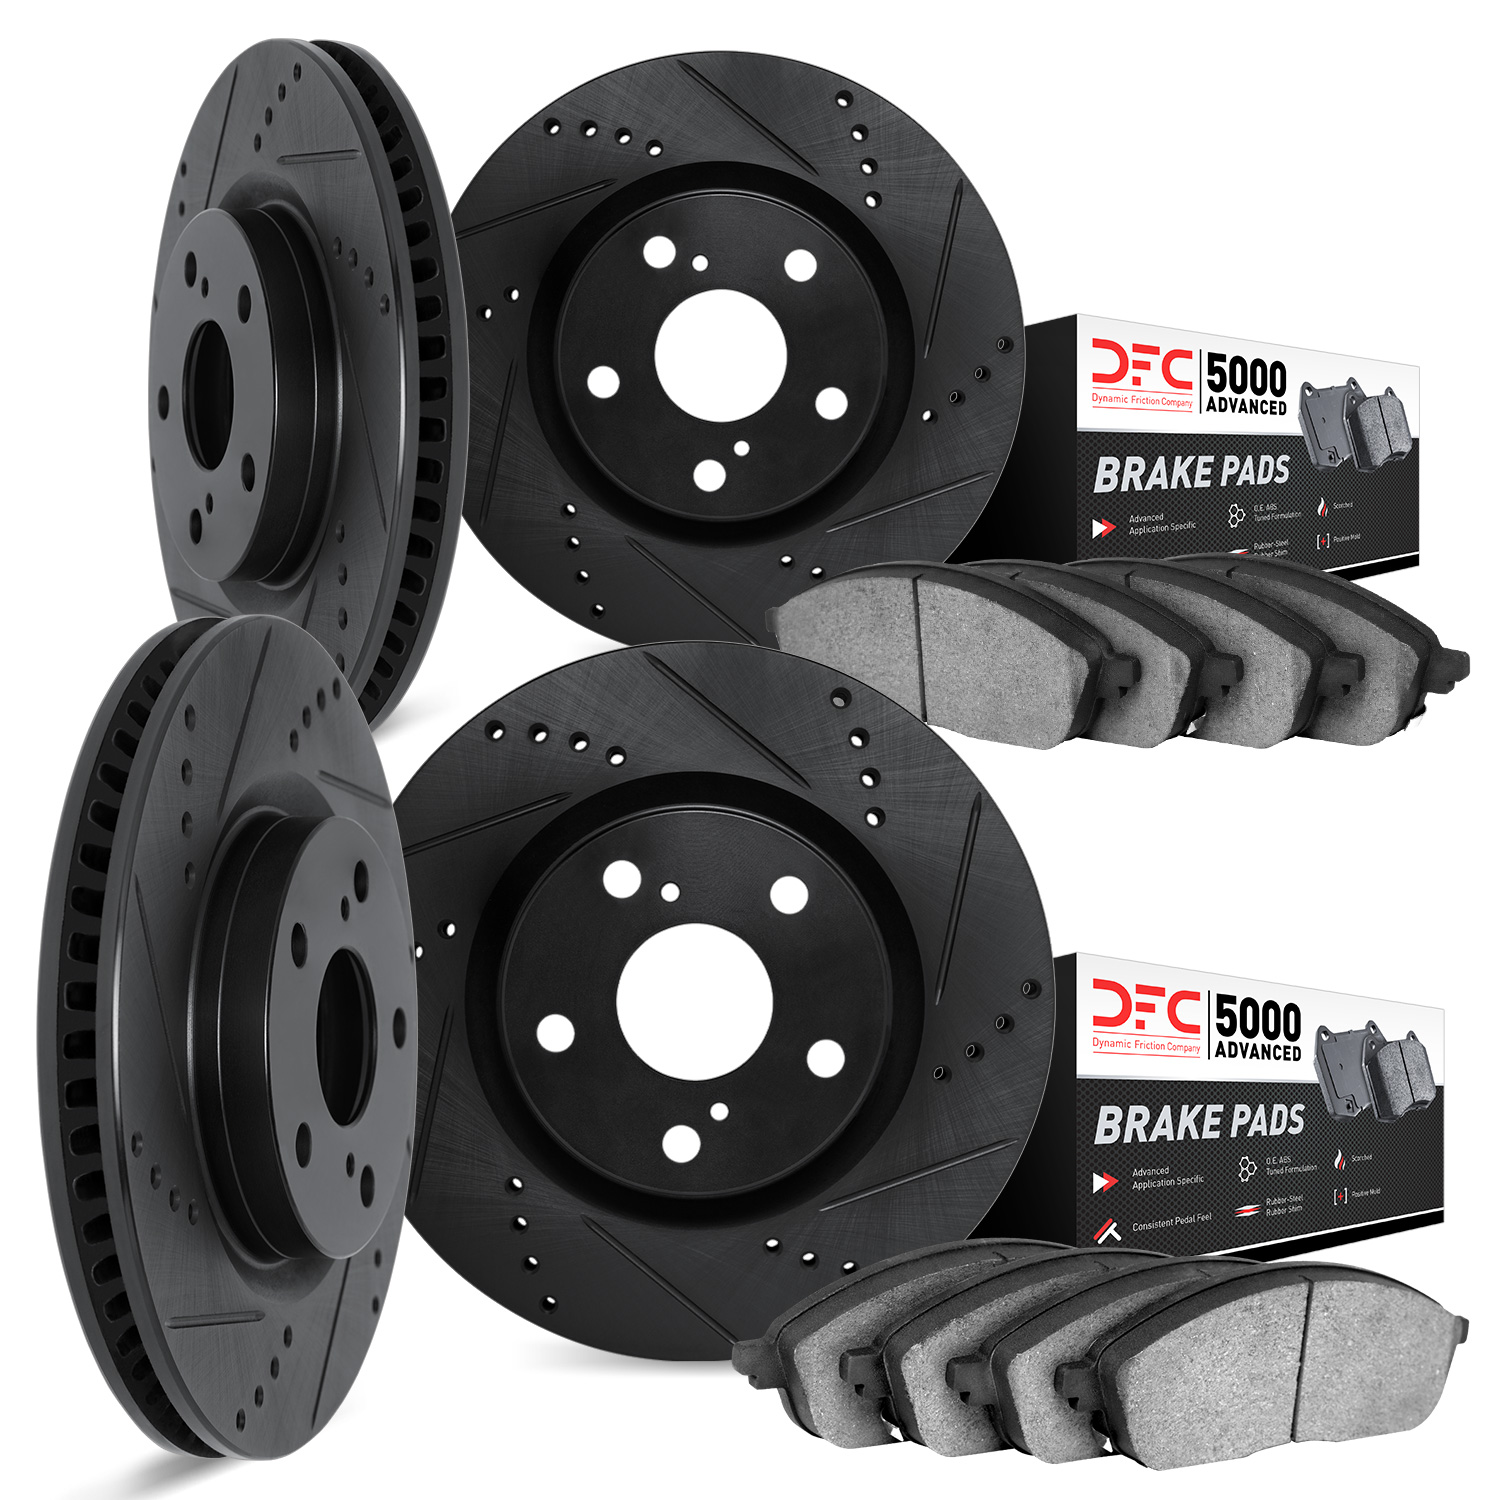 8504-63009 Drilled/Slotted Brake Rotors w/5000 Advanced Brake Pads Kit [Black], Fits Select Mercedes-Benz, Position: Front and R